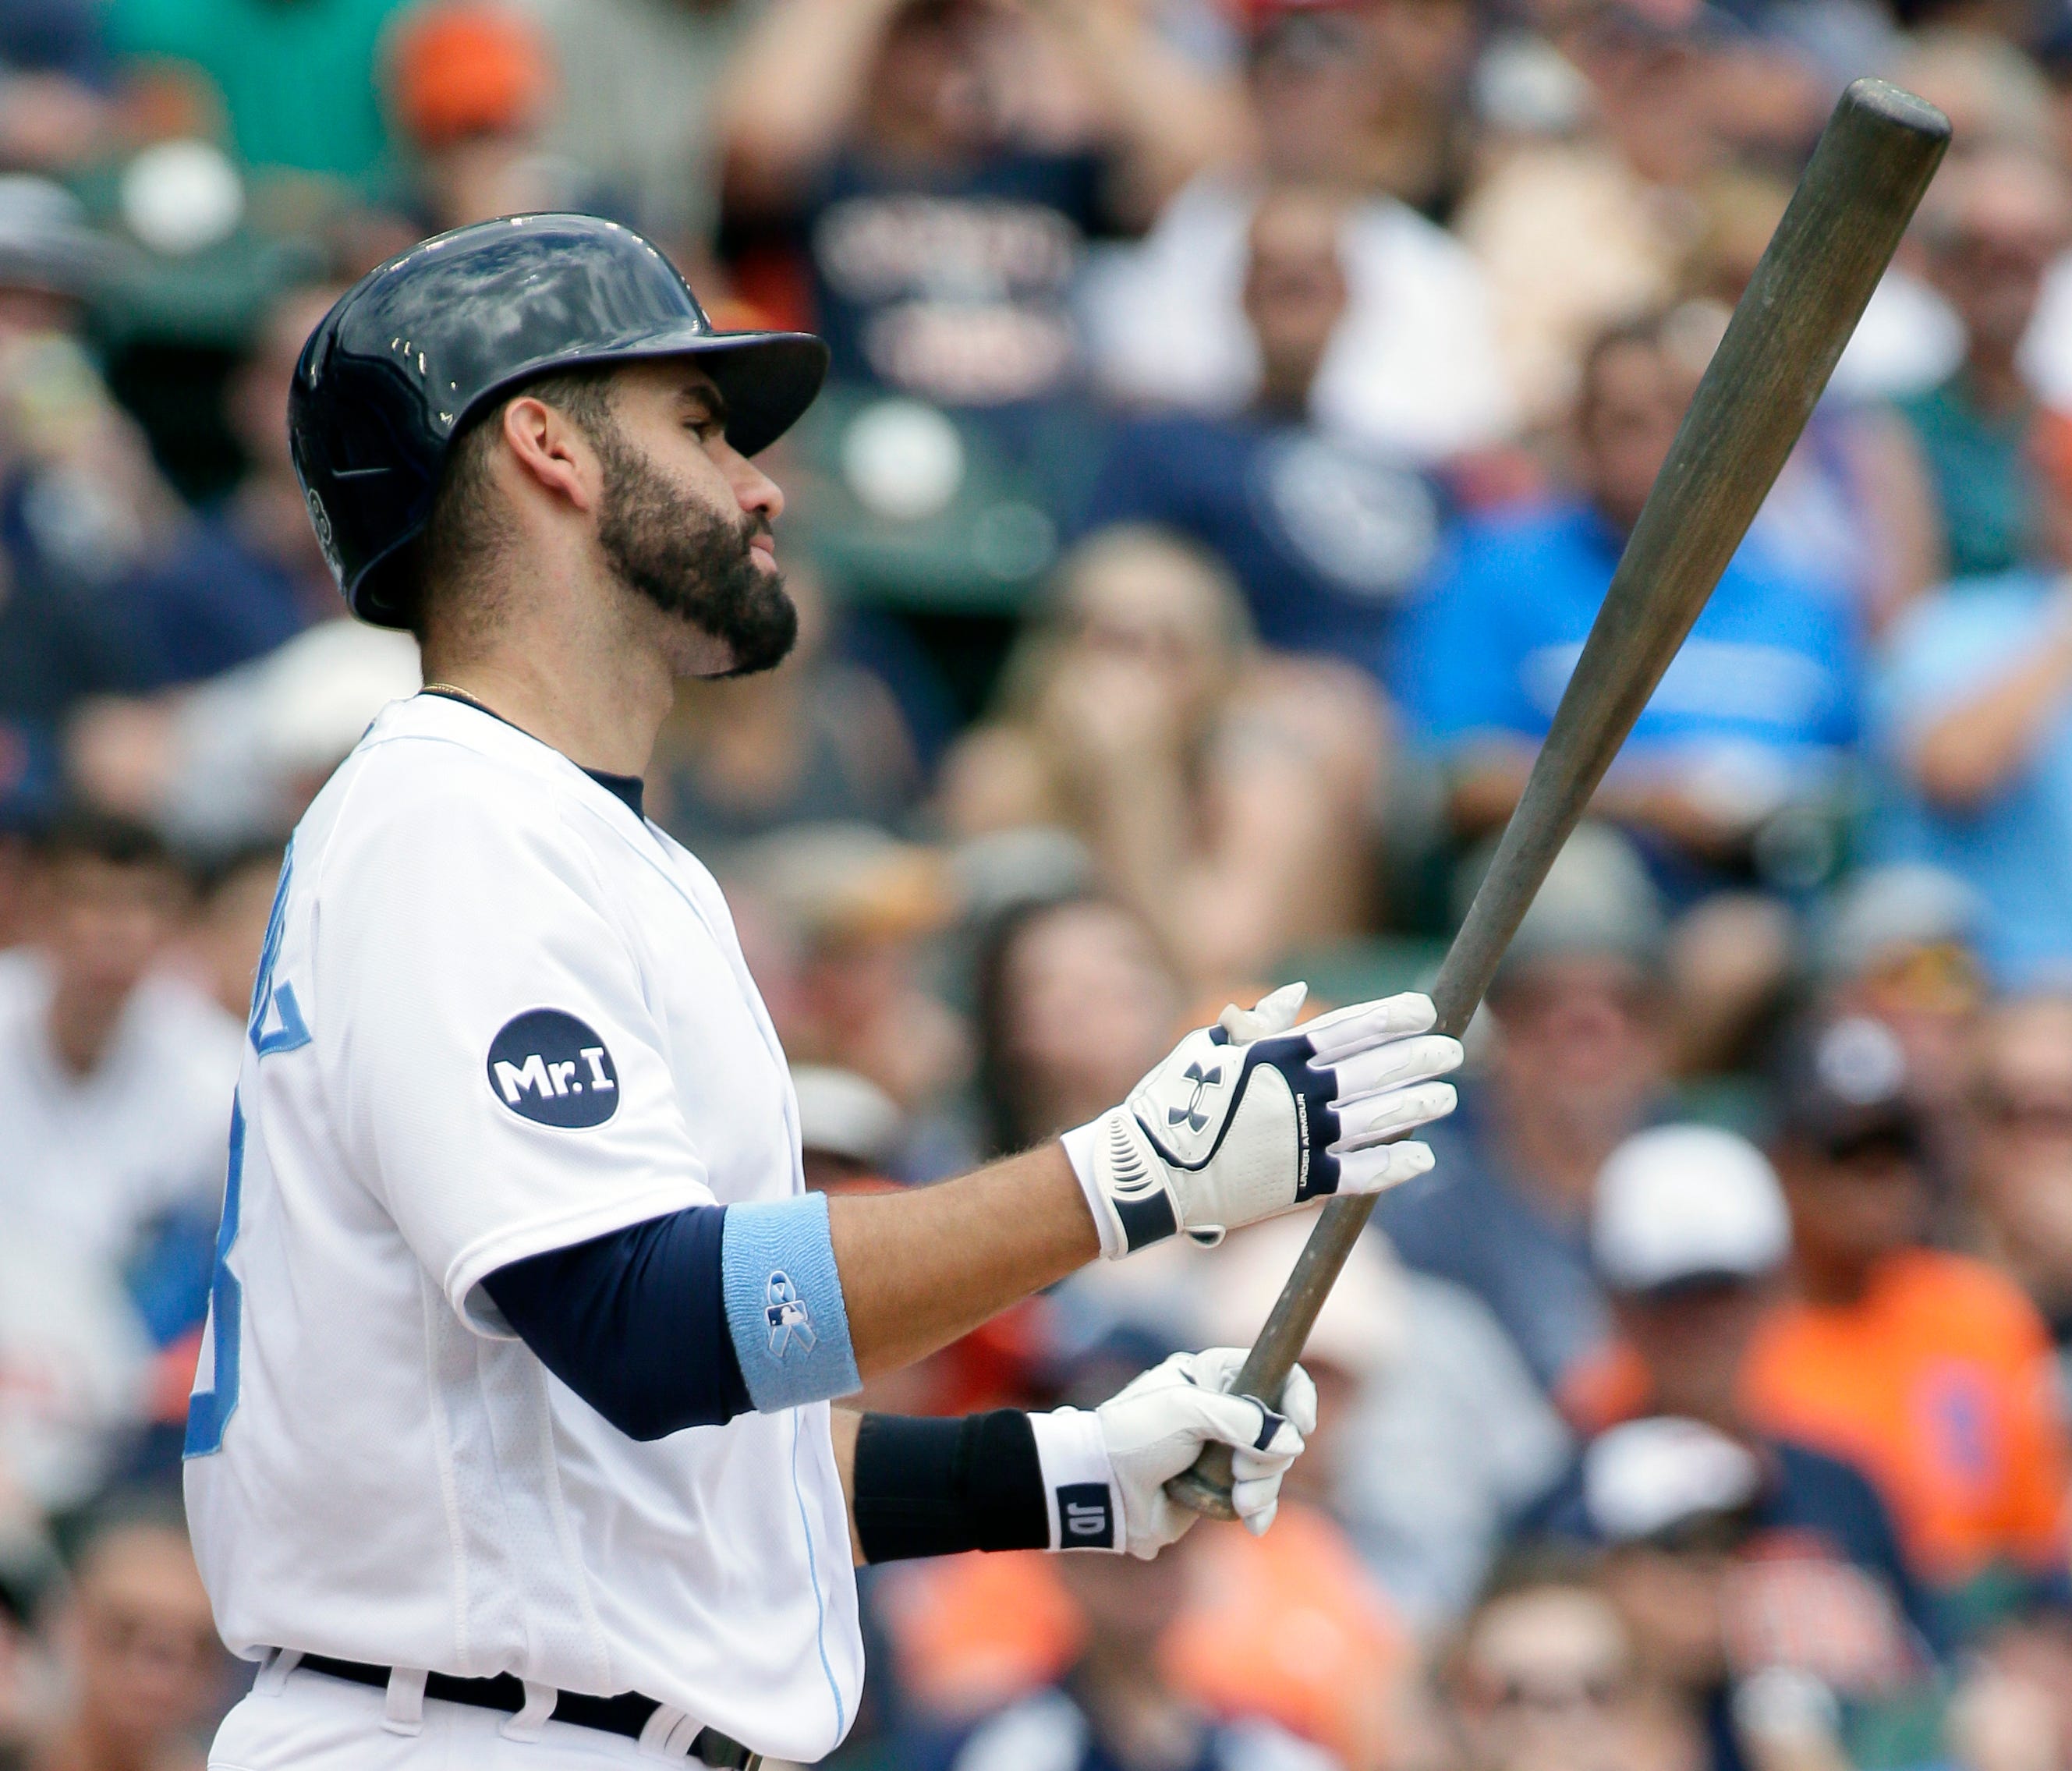 Tigers rightfielder J.D. Martinez reacts after striking out during the first inning of the Tigers' 9-1 loss to the Rays Sunday at Comerica Park.